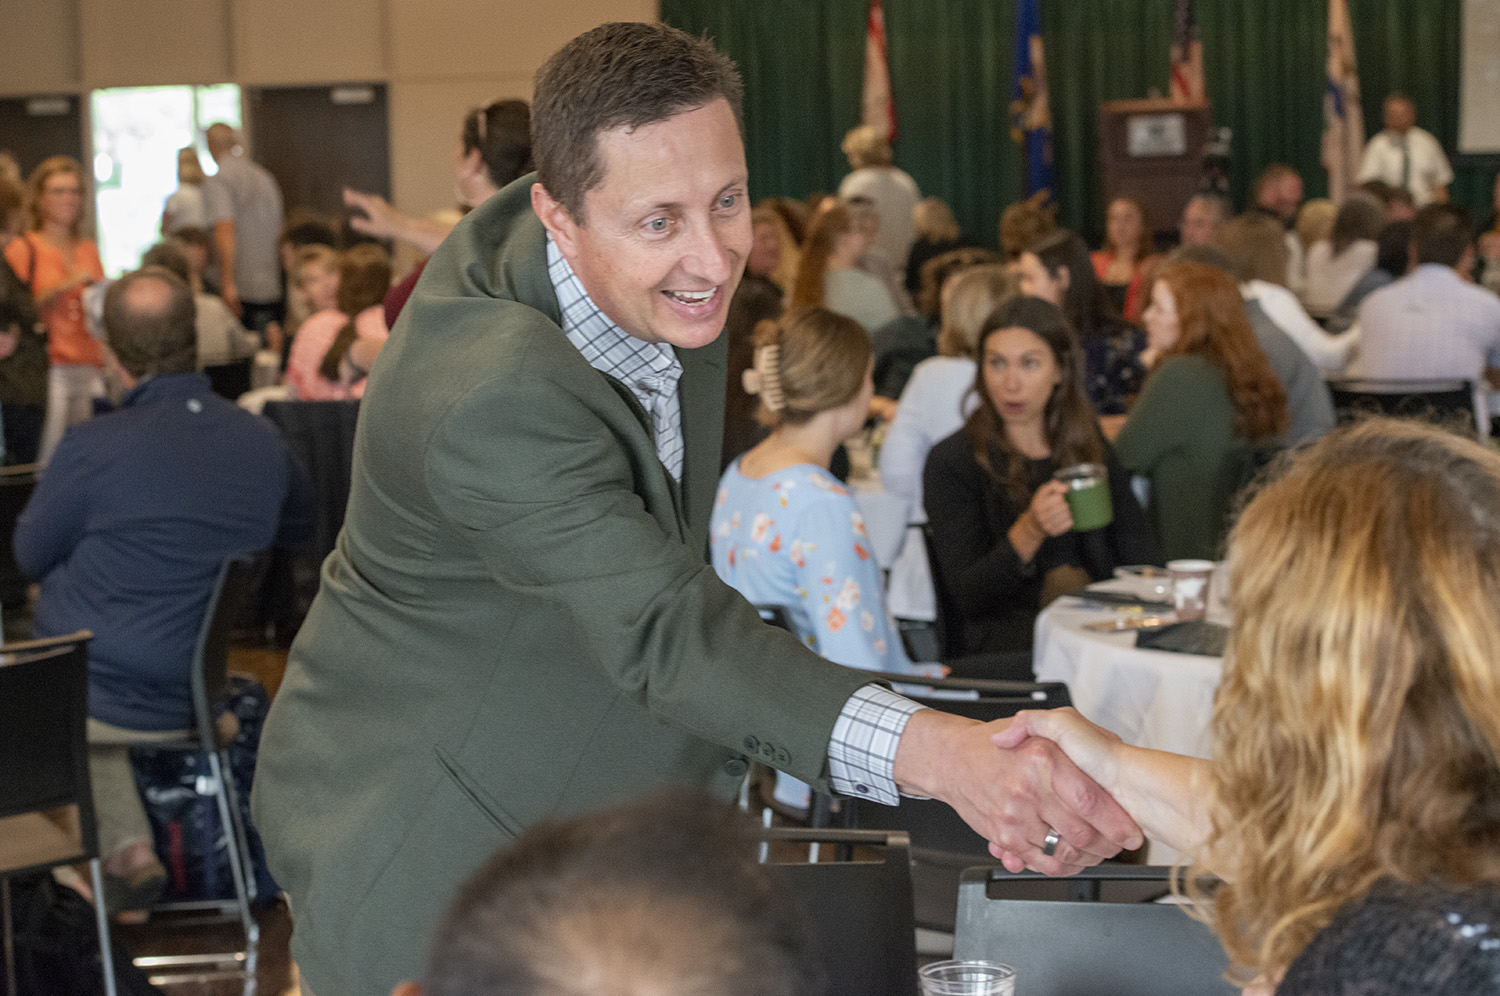 BSU President Dr. John Hoffman welcomes an attendee of the 2022-23 Fall Welcome Breakfast on August 16 in Beaux Arts Ballroom